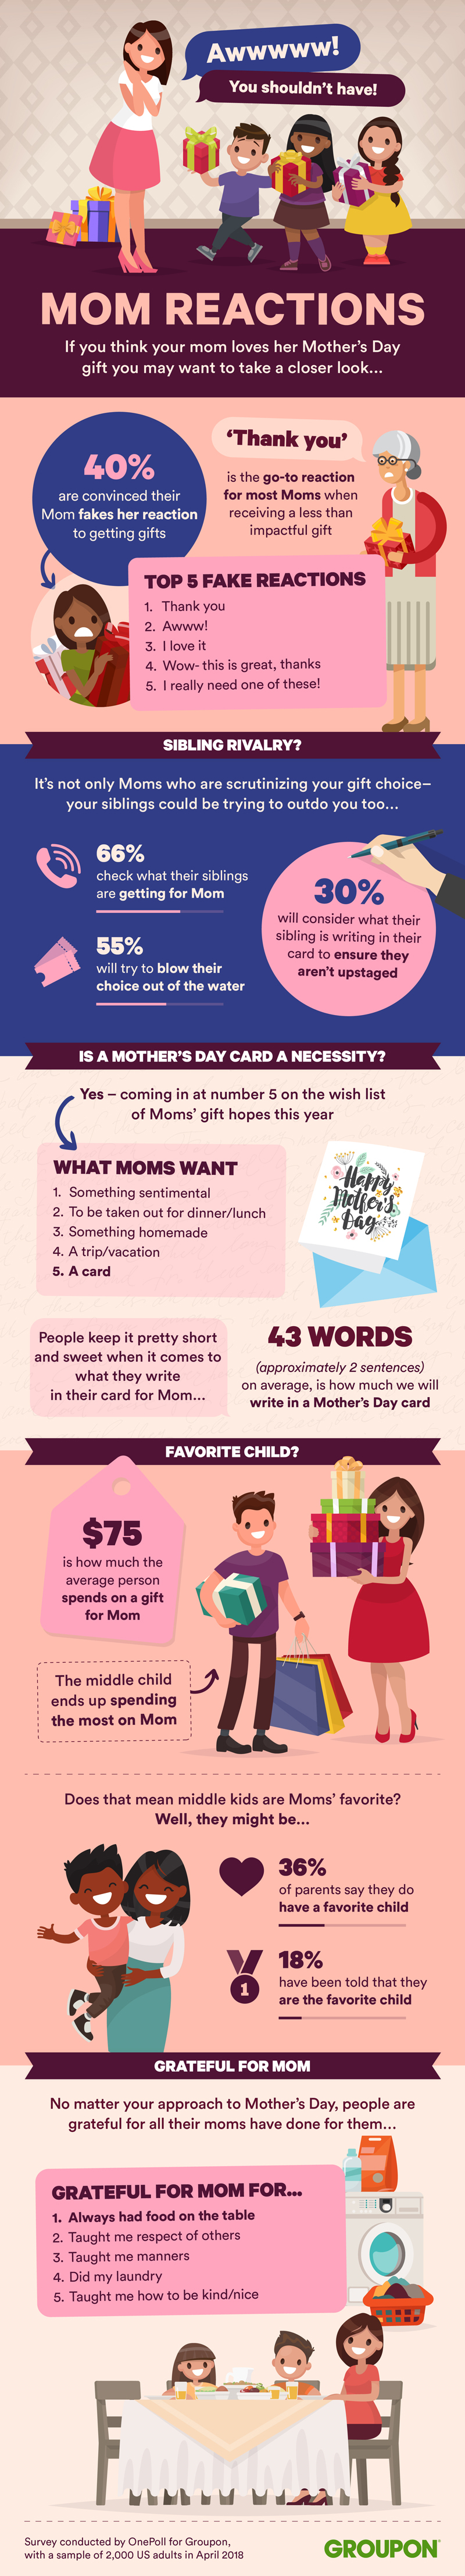 13 Gifts To Get Your Mom This Mother's Day (Based on survey results of what  she really wants)! - Must Have Mom